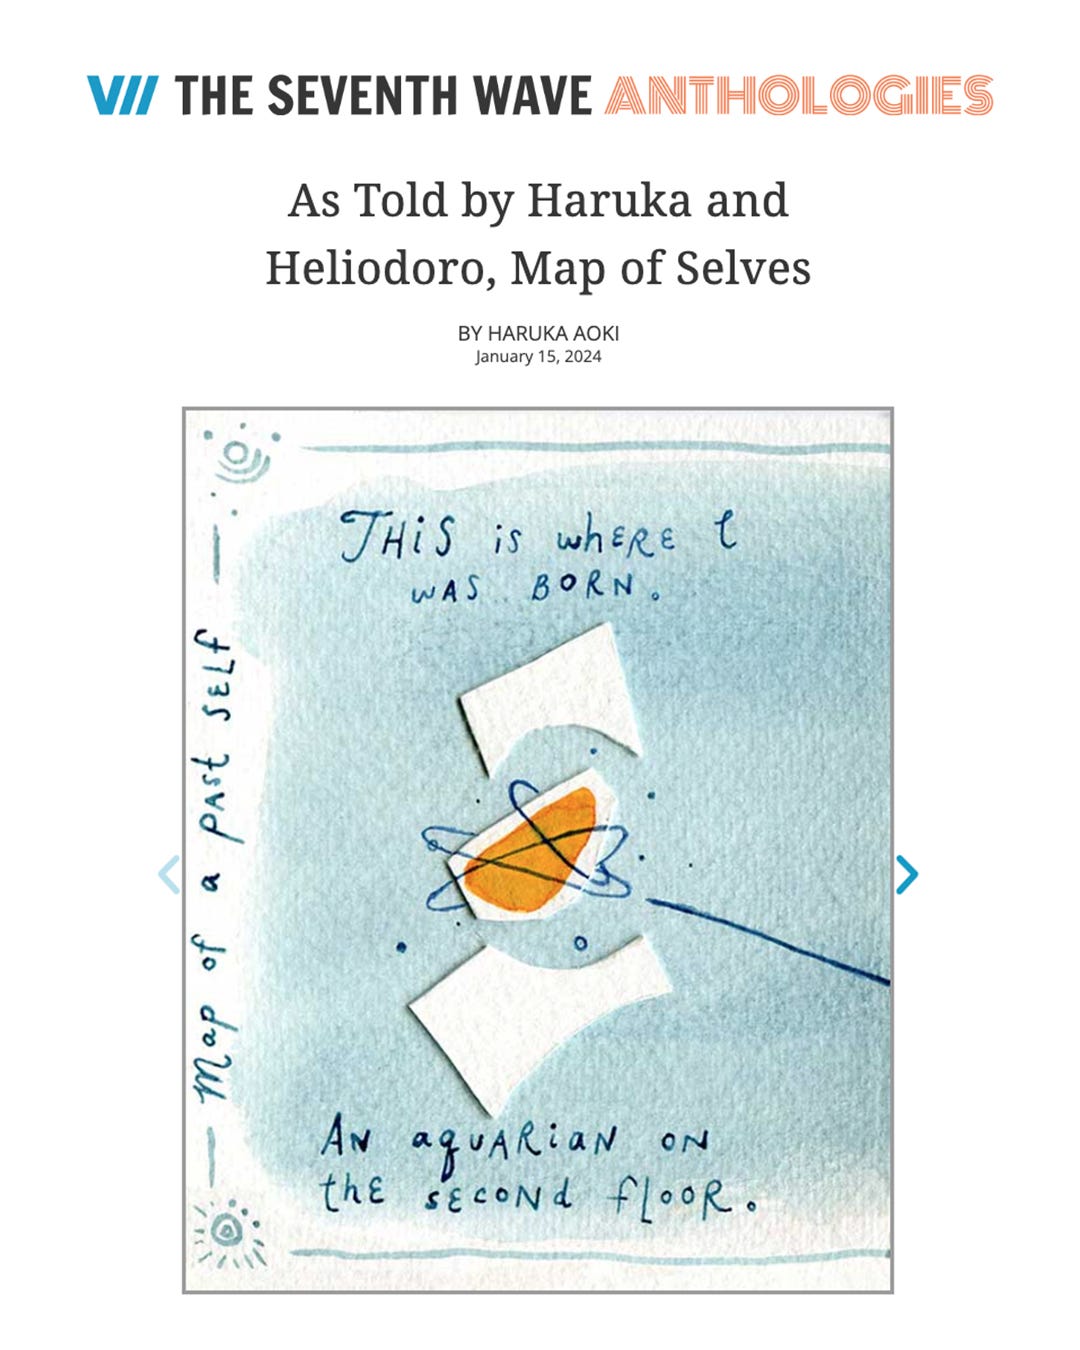 a graphic featuring an image from an illustrated artwork called "As Told by Haruka and Heliodoro, Map of Selves." The image is light blue and has handwritten text and cut paper shapes on it.